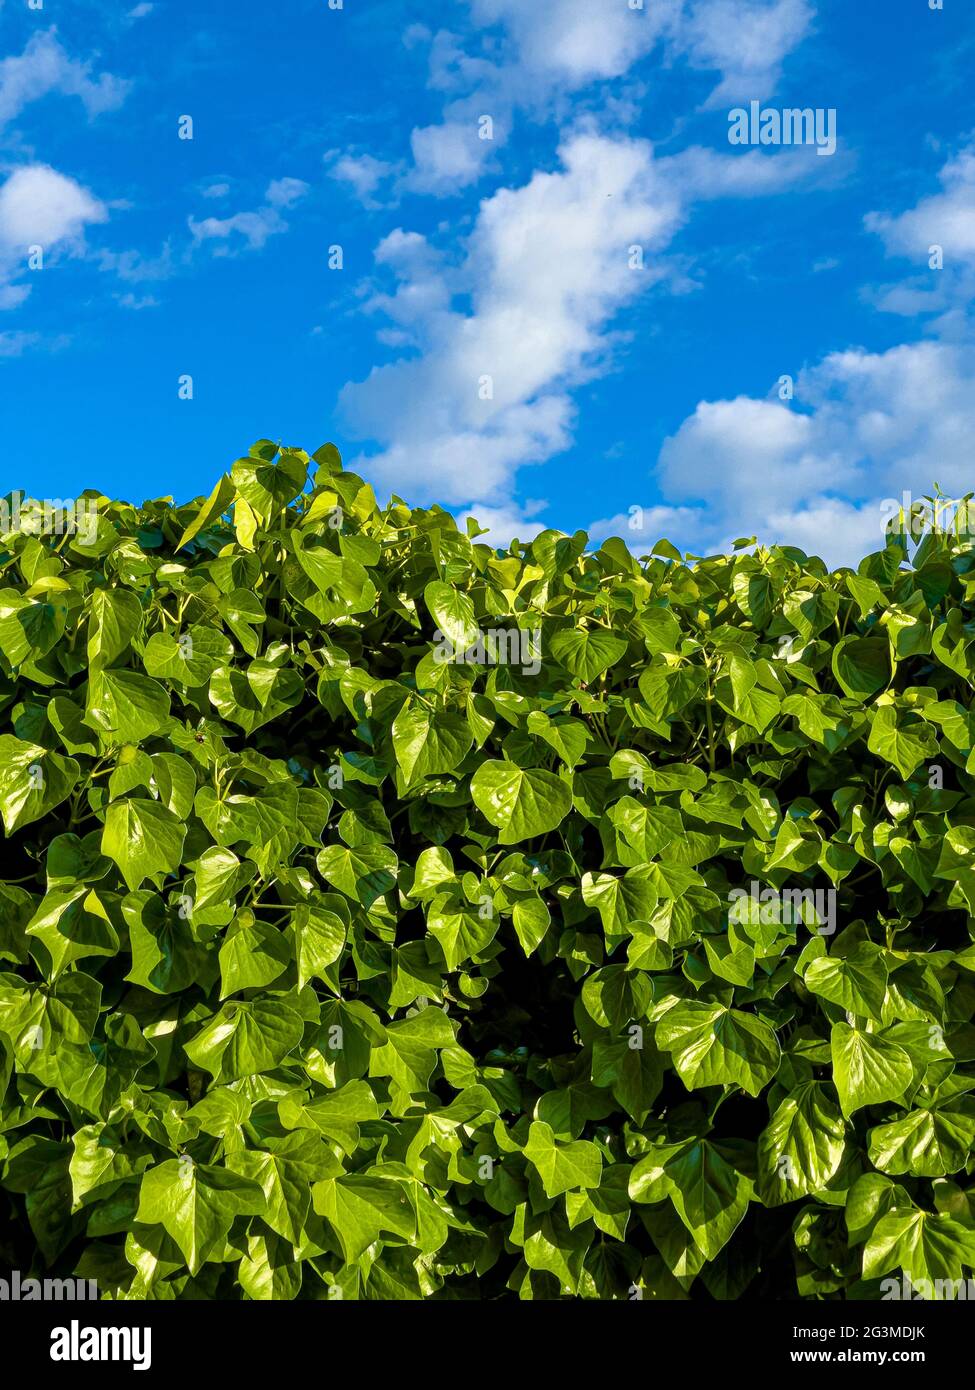 Graphic photo of fresh green ivy hedge and blue sky Stock Photo